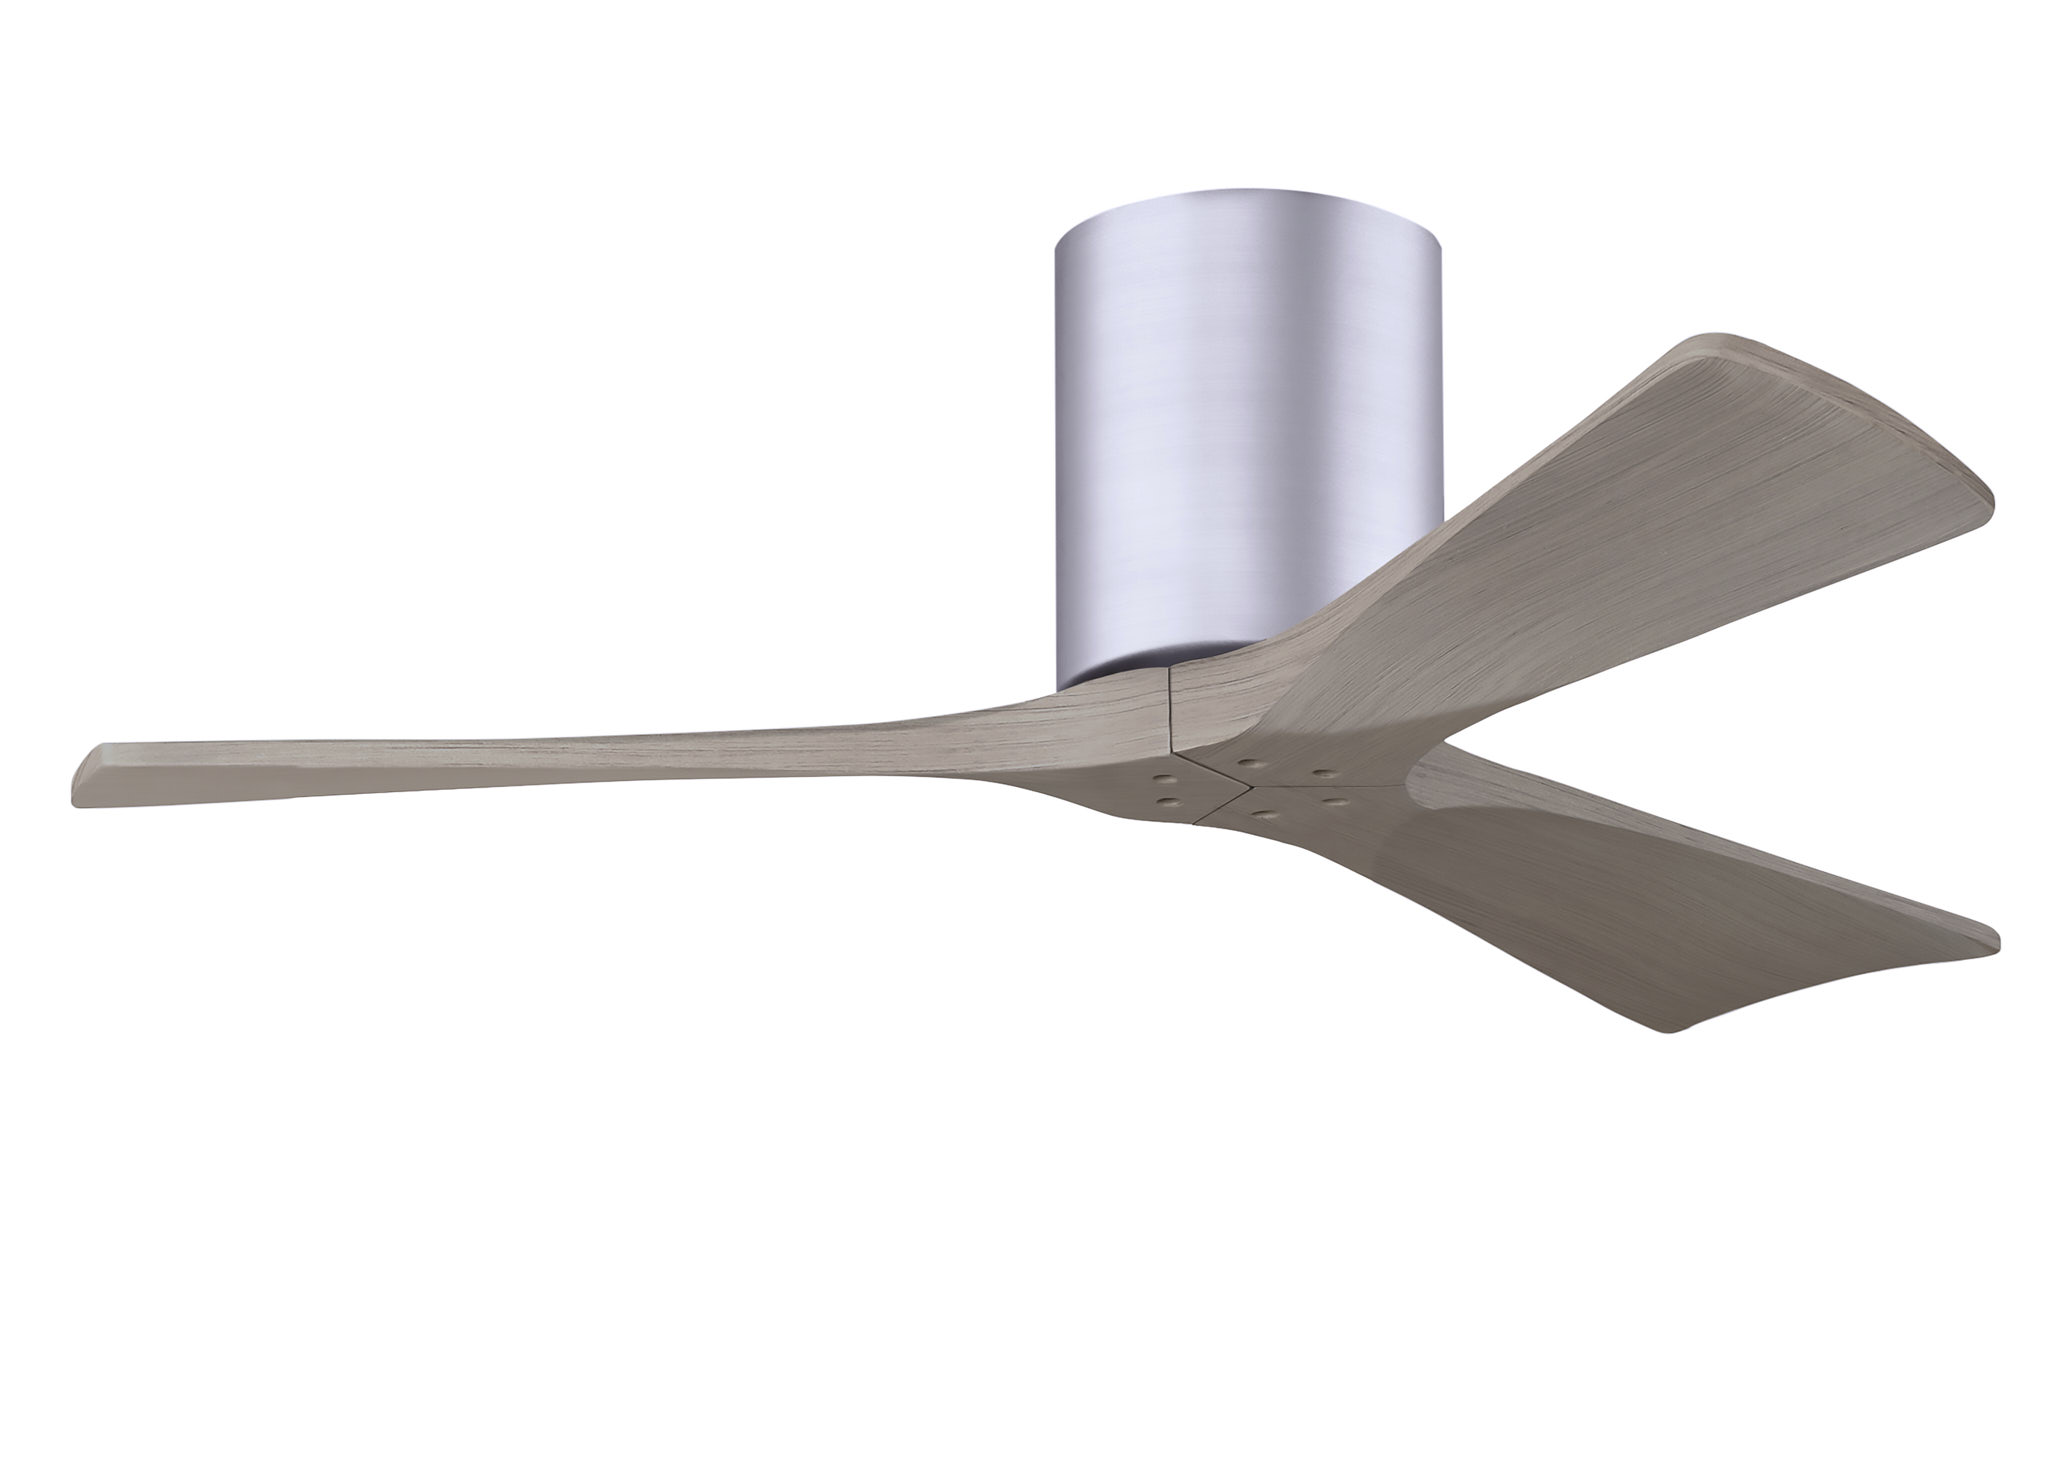 Irene-3H 6-speed ceiling fan in brushed nickel finish with 42